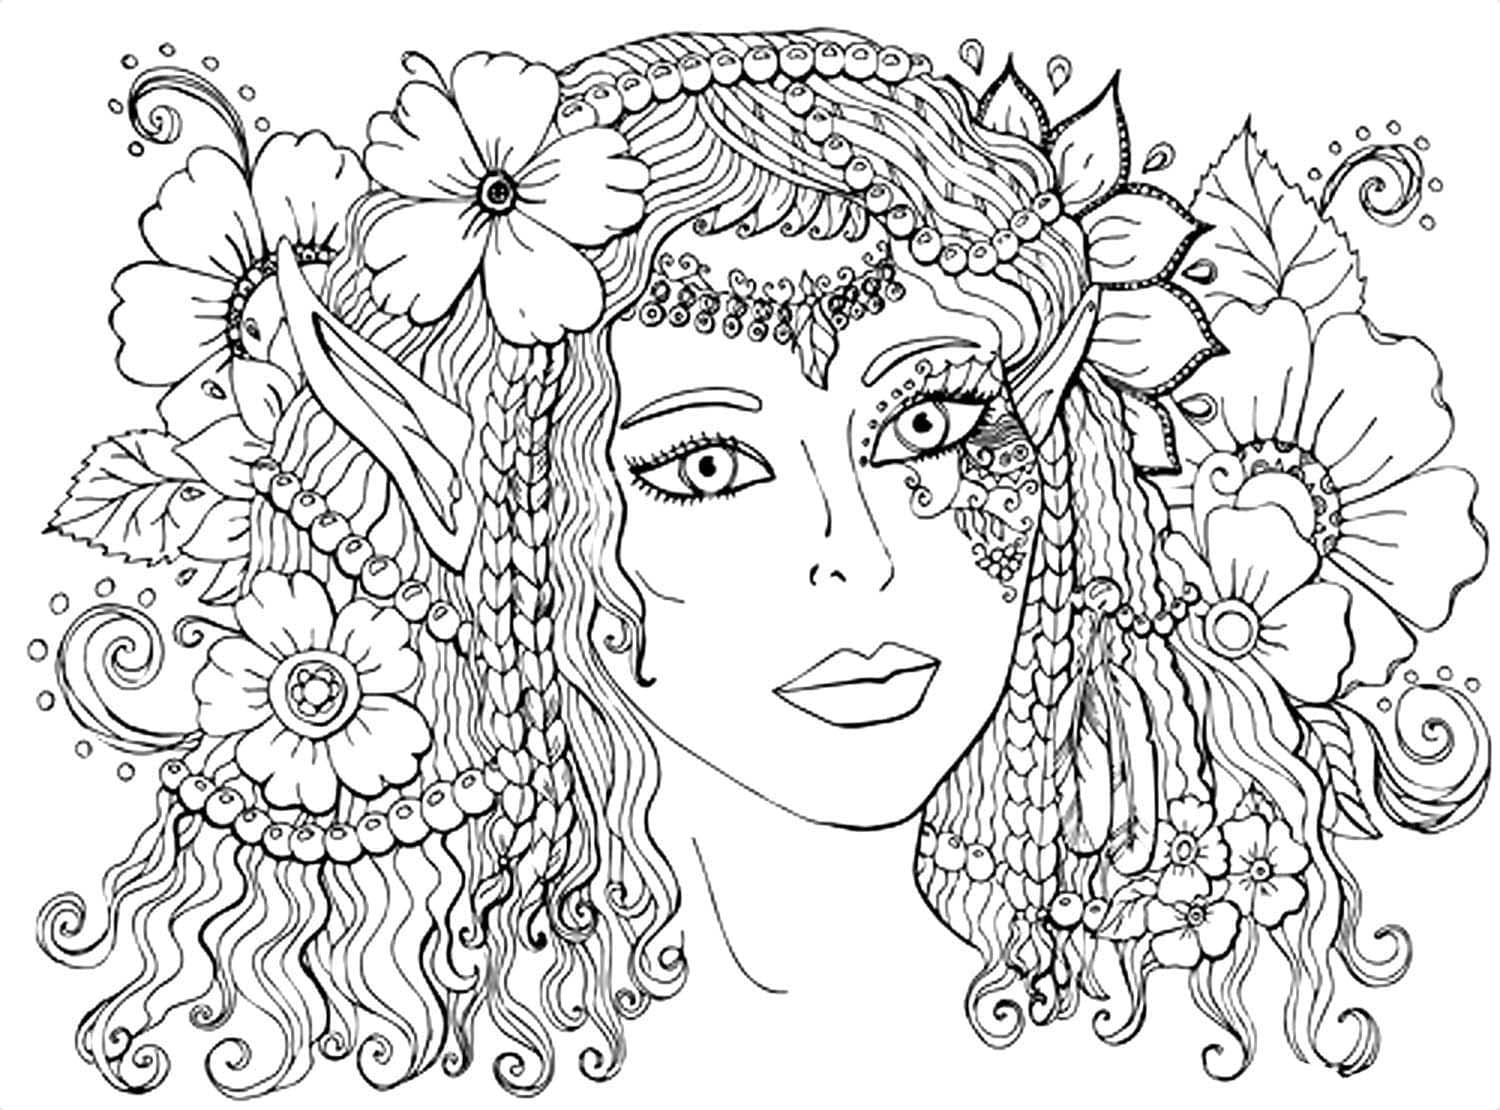 Dame Elfe coloring page